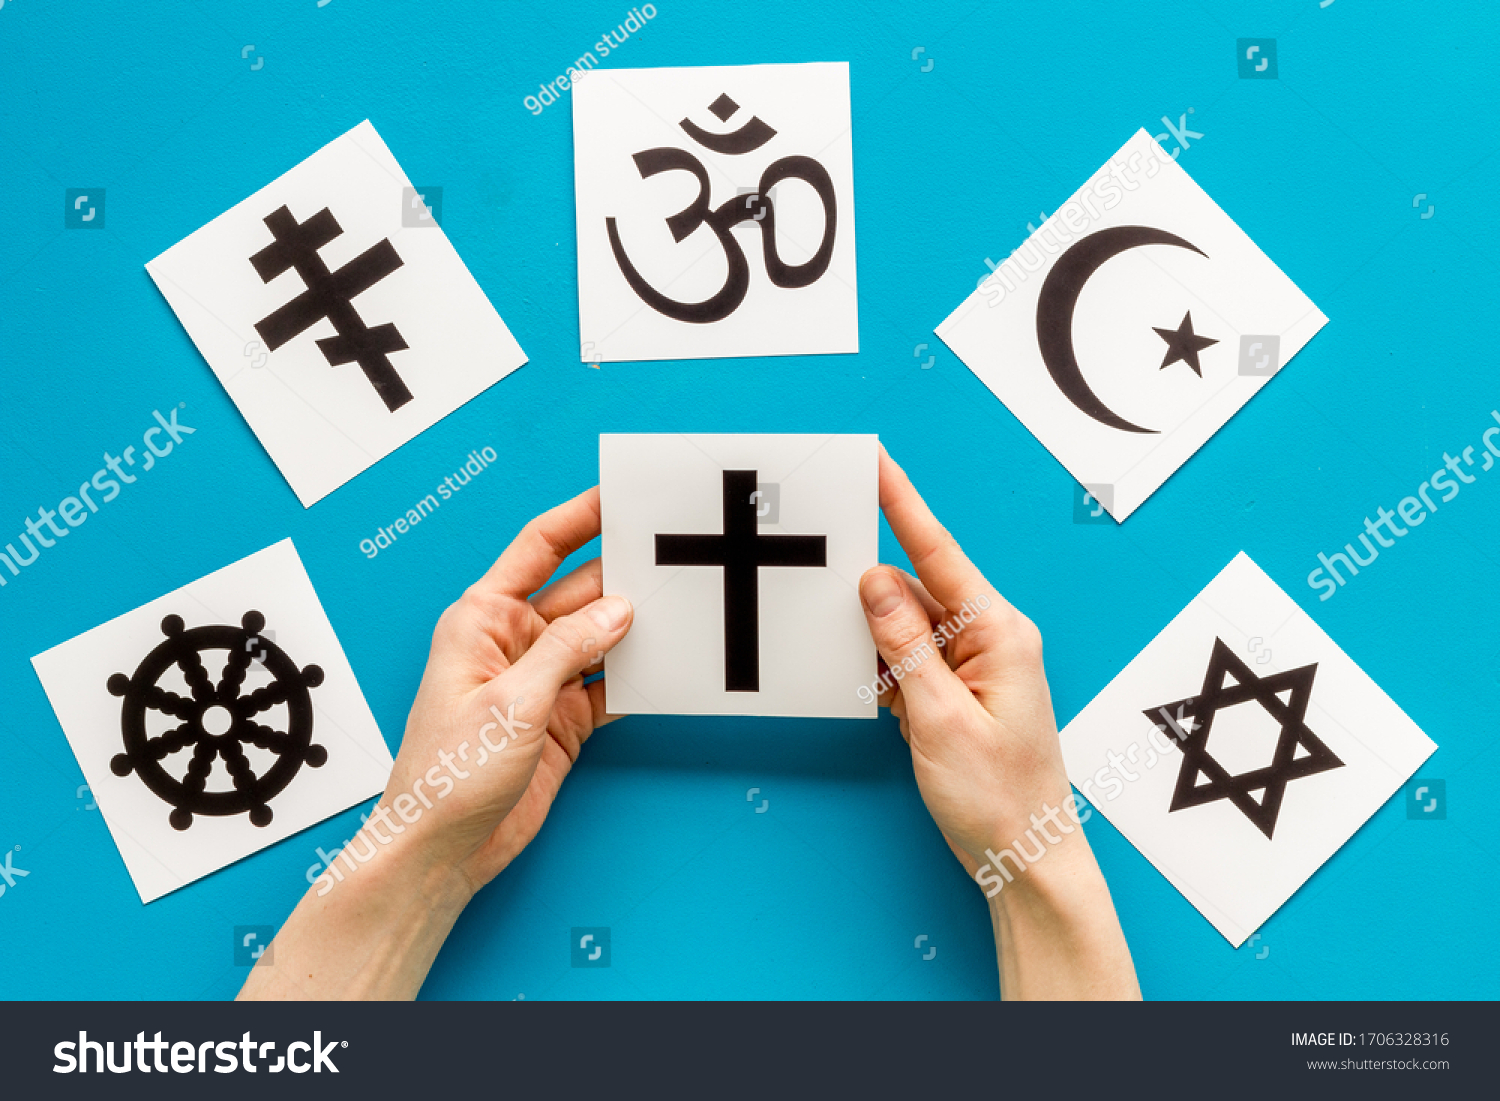 Choose religion concept. Hand with catholic cross near world religions symbols on blue background top view #1706328316